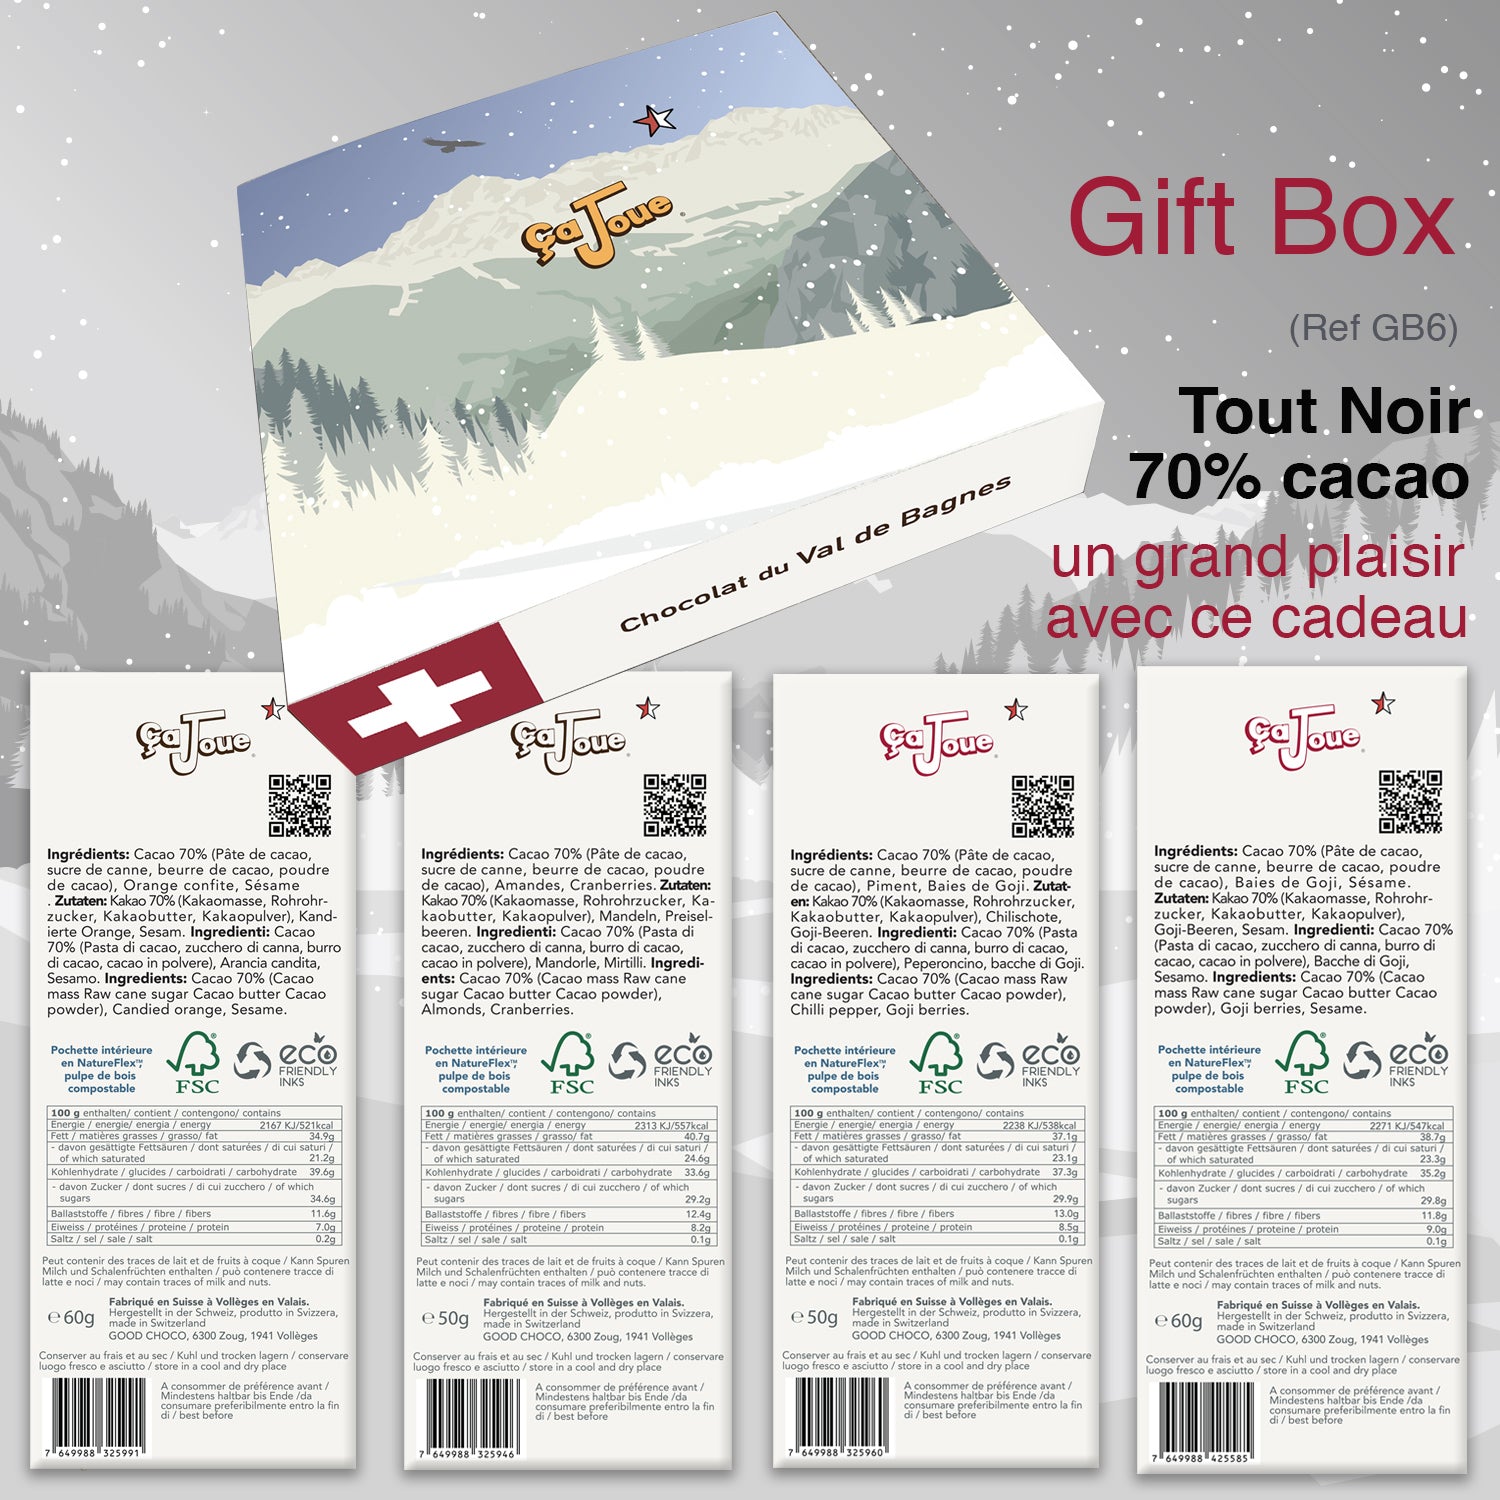 Gift Box (Ref GB6) Chocolate from Val de Bagnes